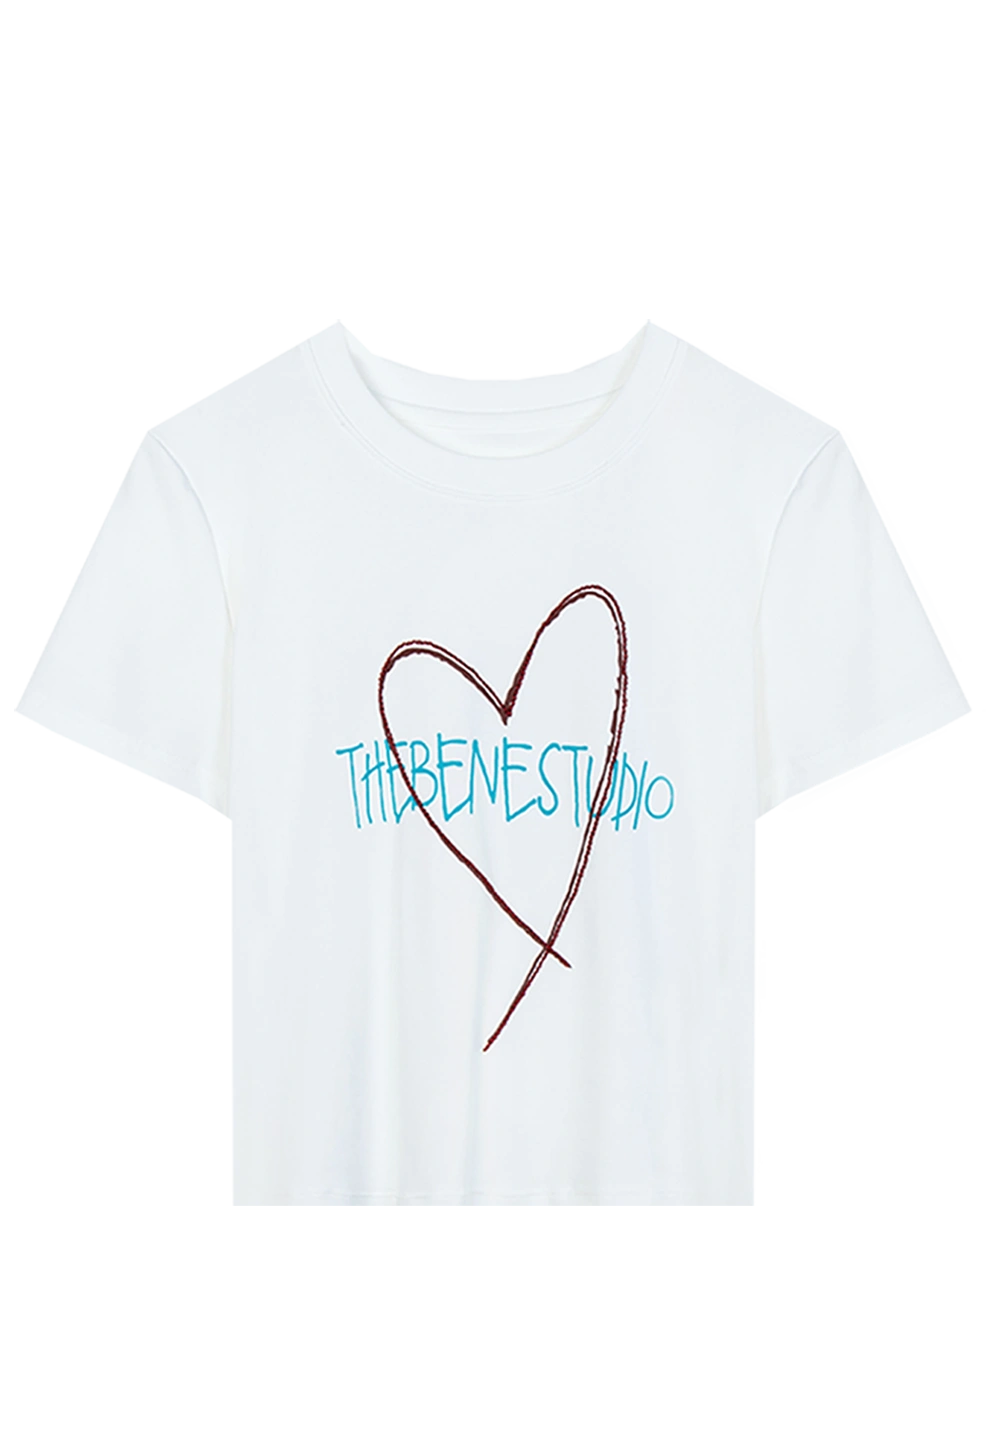 ight Pink T-Shirt with Heart Sketch and 'Thrive Bene Studio' Text - Artsy Casual Wear